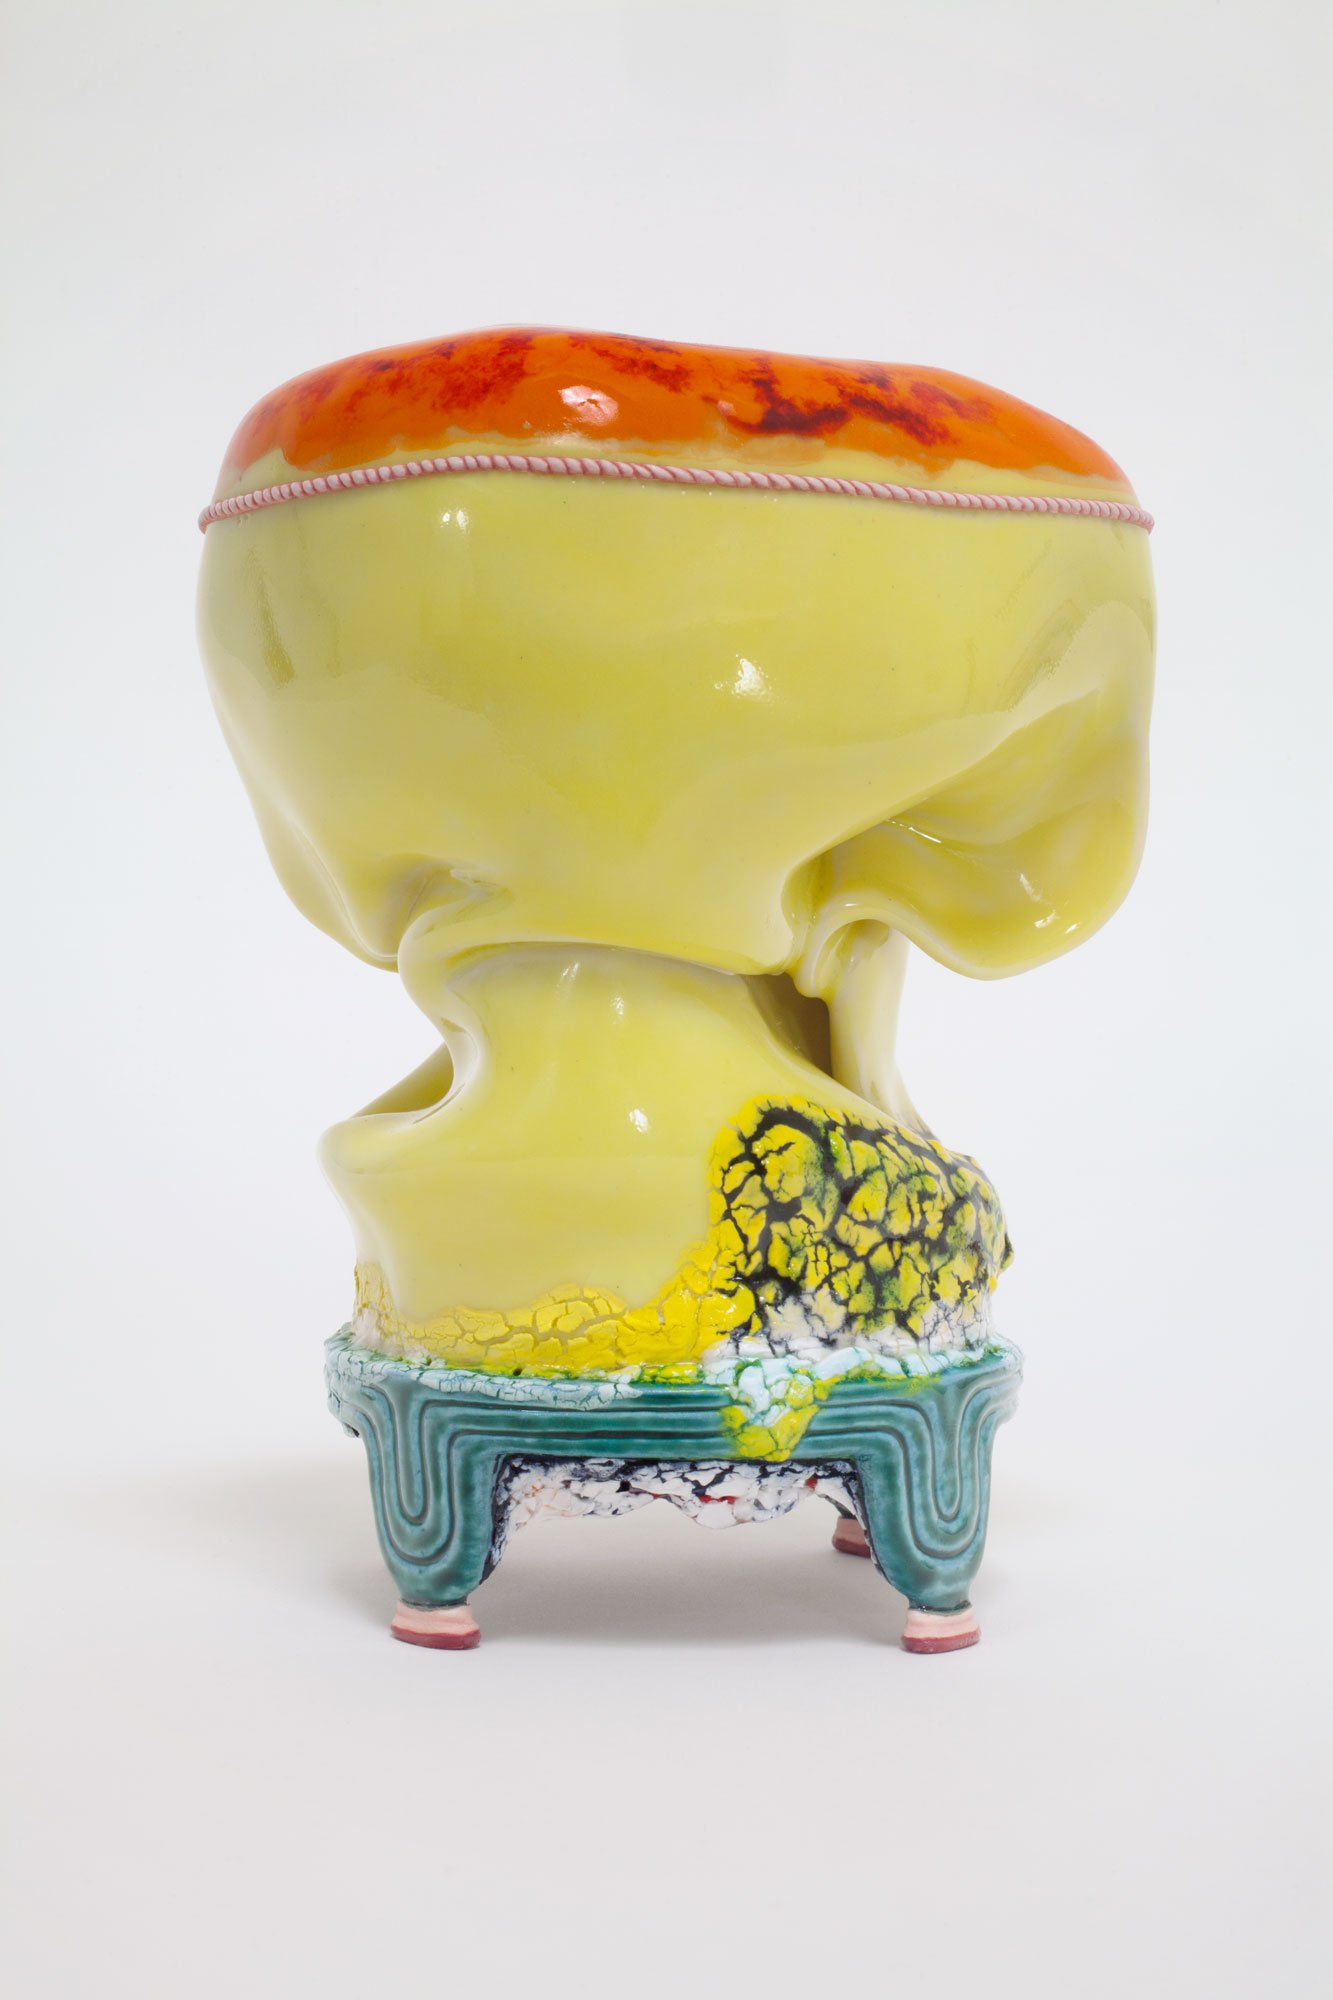  Kathy Butterly (United States, born 1963),  Color Hoard-r , 2013, clay, glaze, 5 x 3 3/4 x 3 inches. Courtesy of the artist. © Kathy Butterly. Image courtesy the artist and James Cohan, New York. Photo: Alan Wiener.  